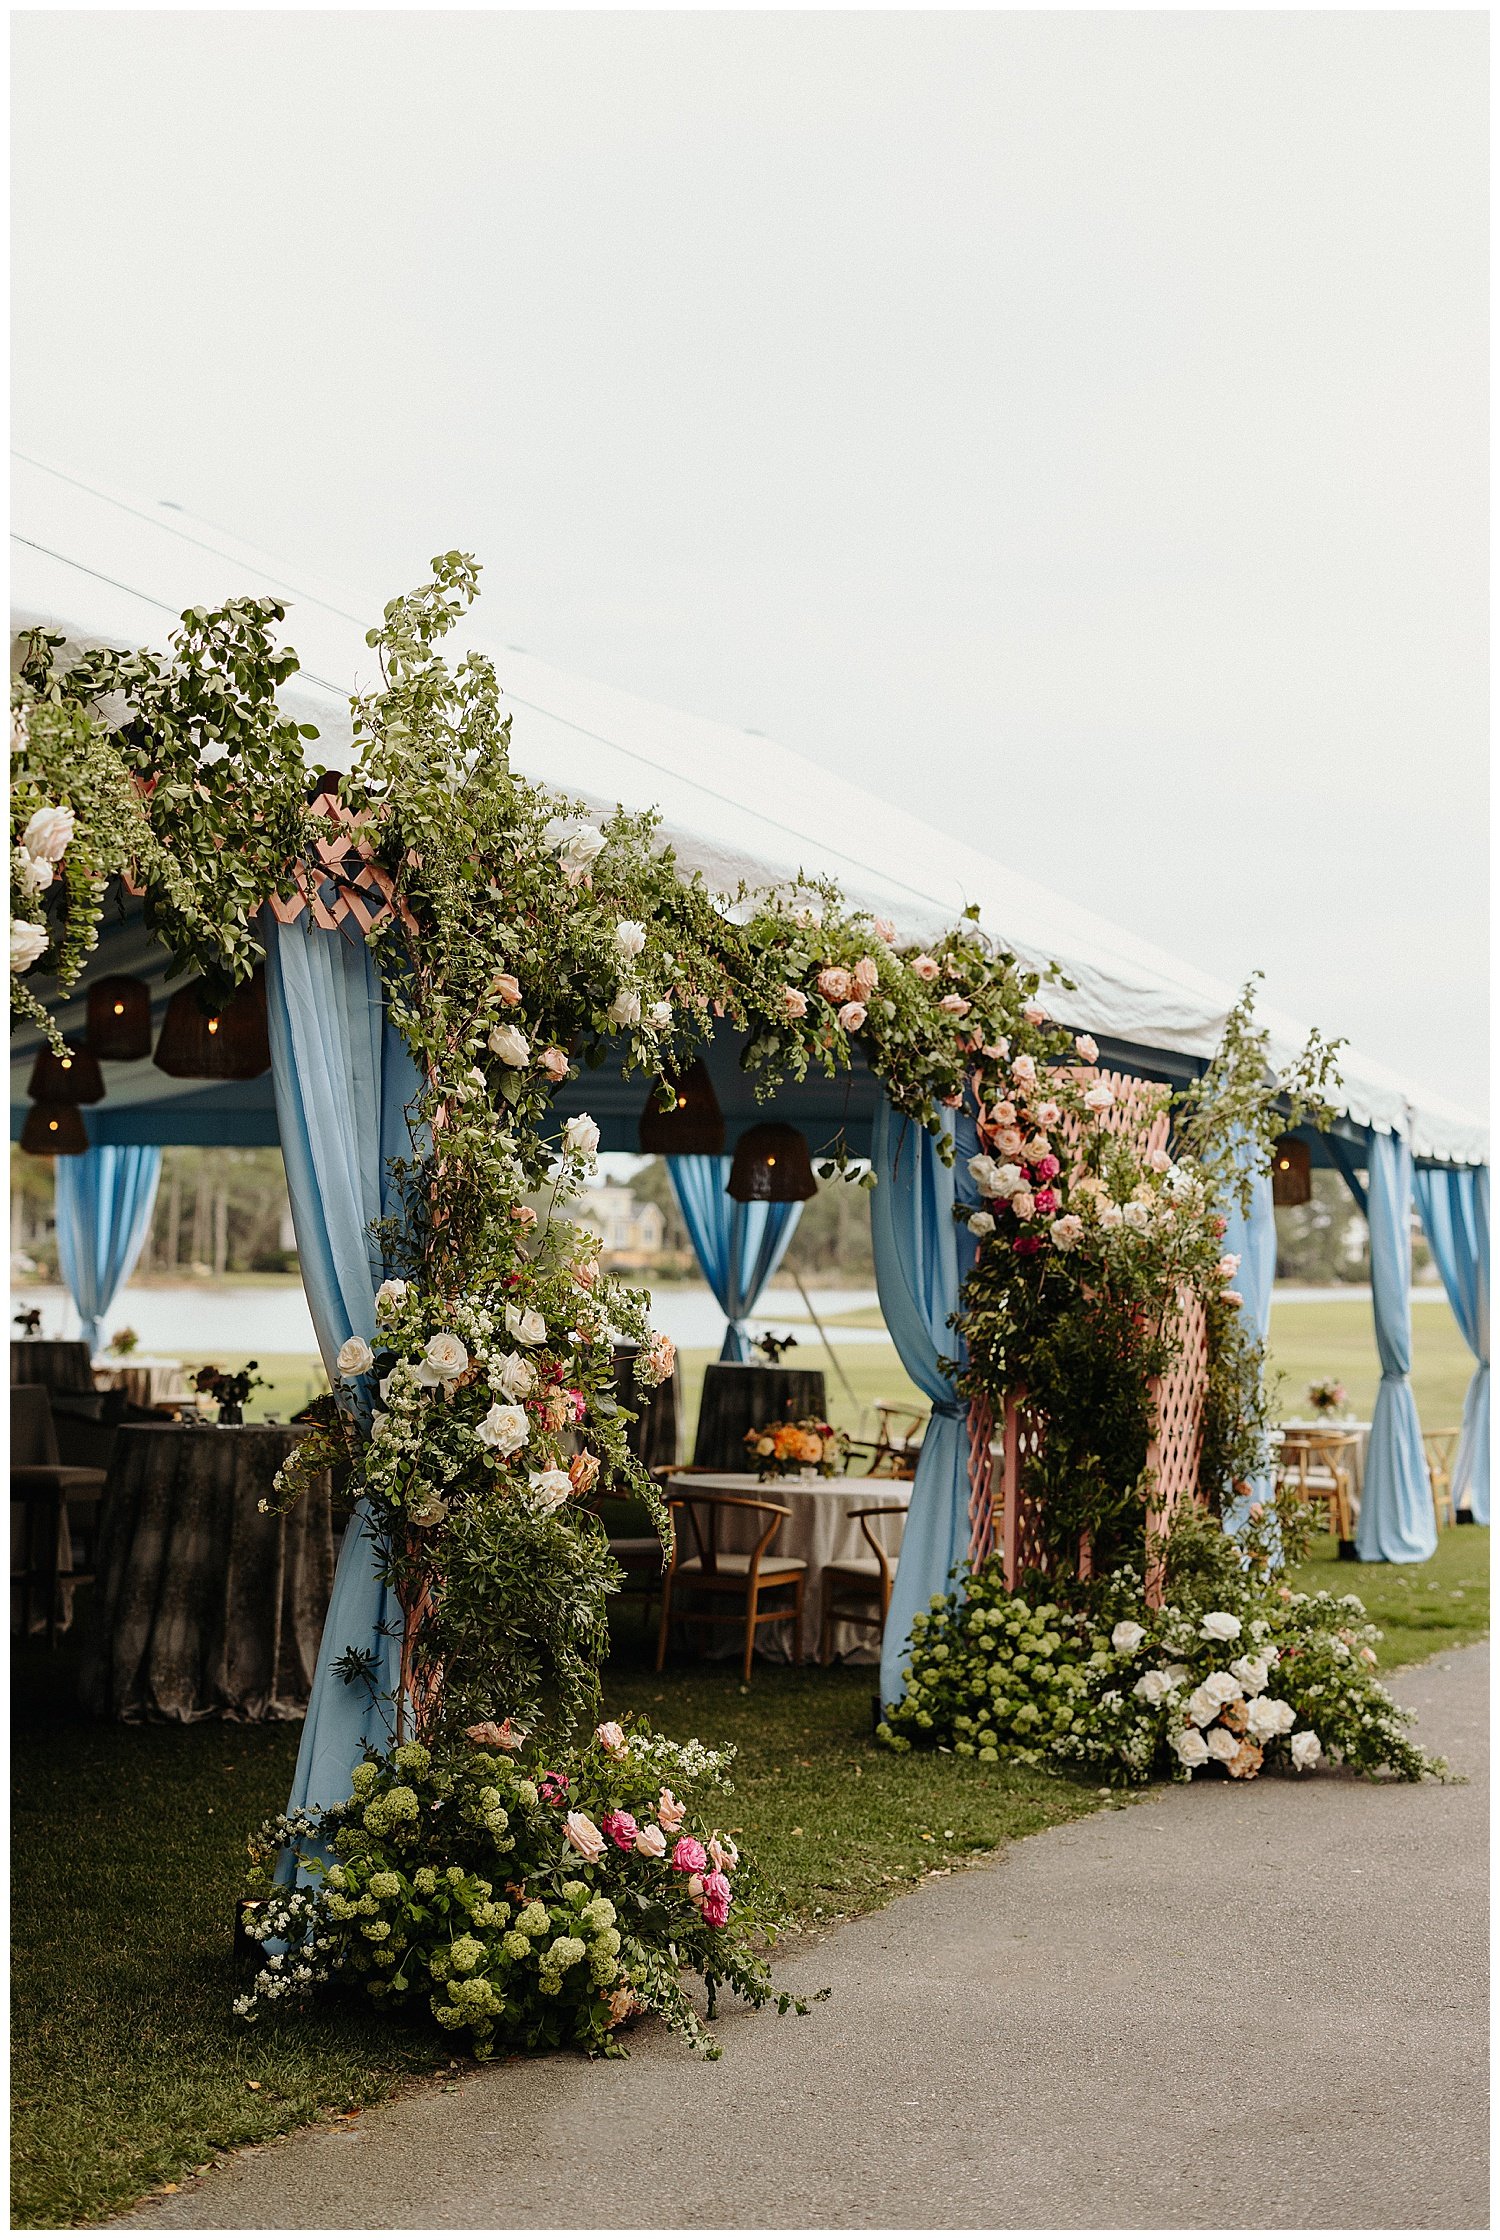 floral entrance to tent wedding reception